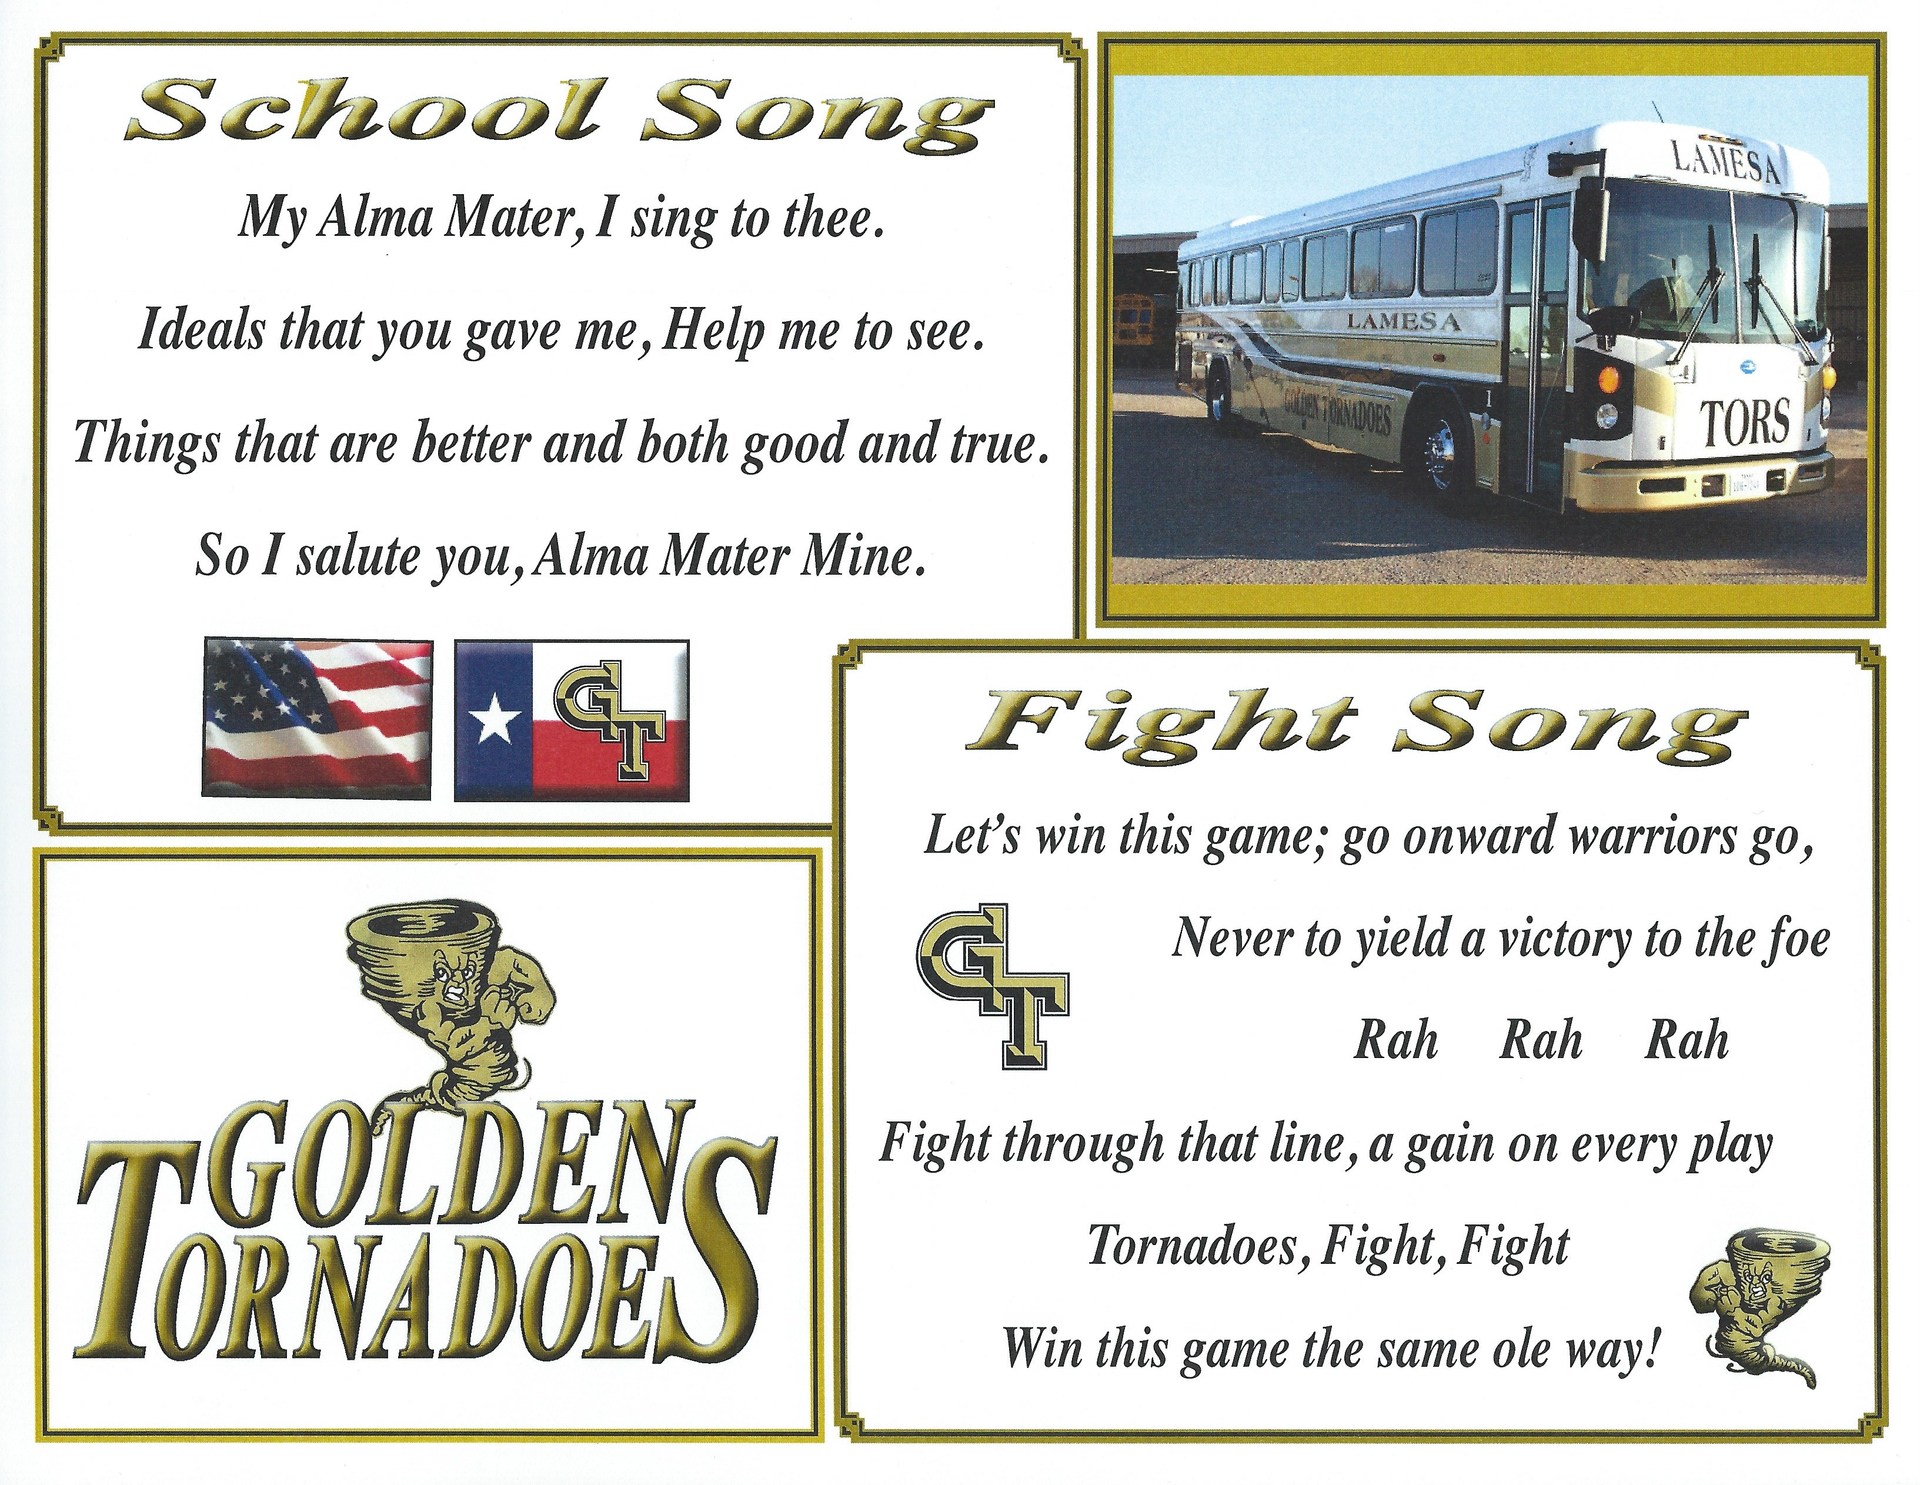 SCHOOL SONG AND FIGHT SONG